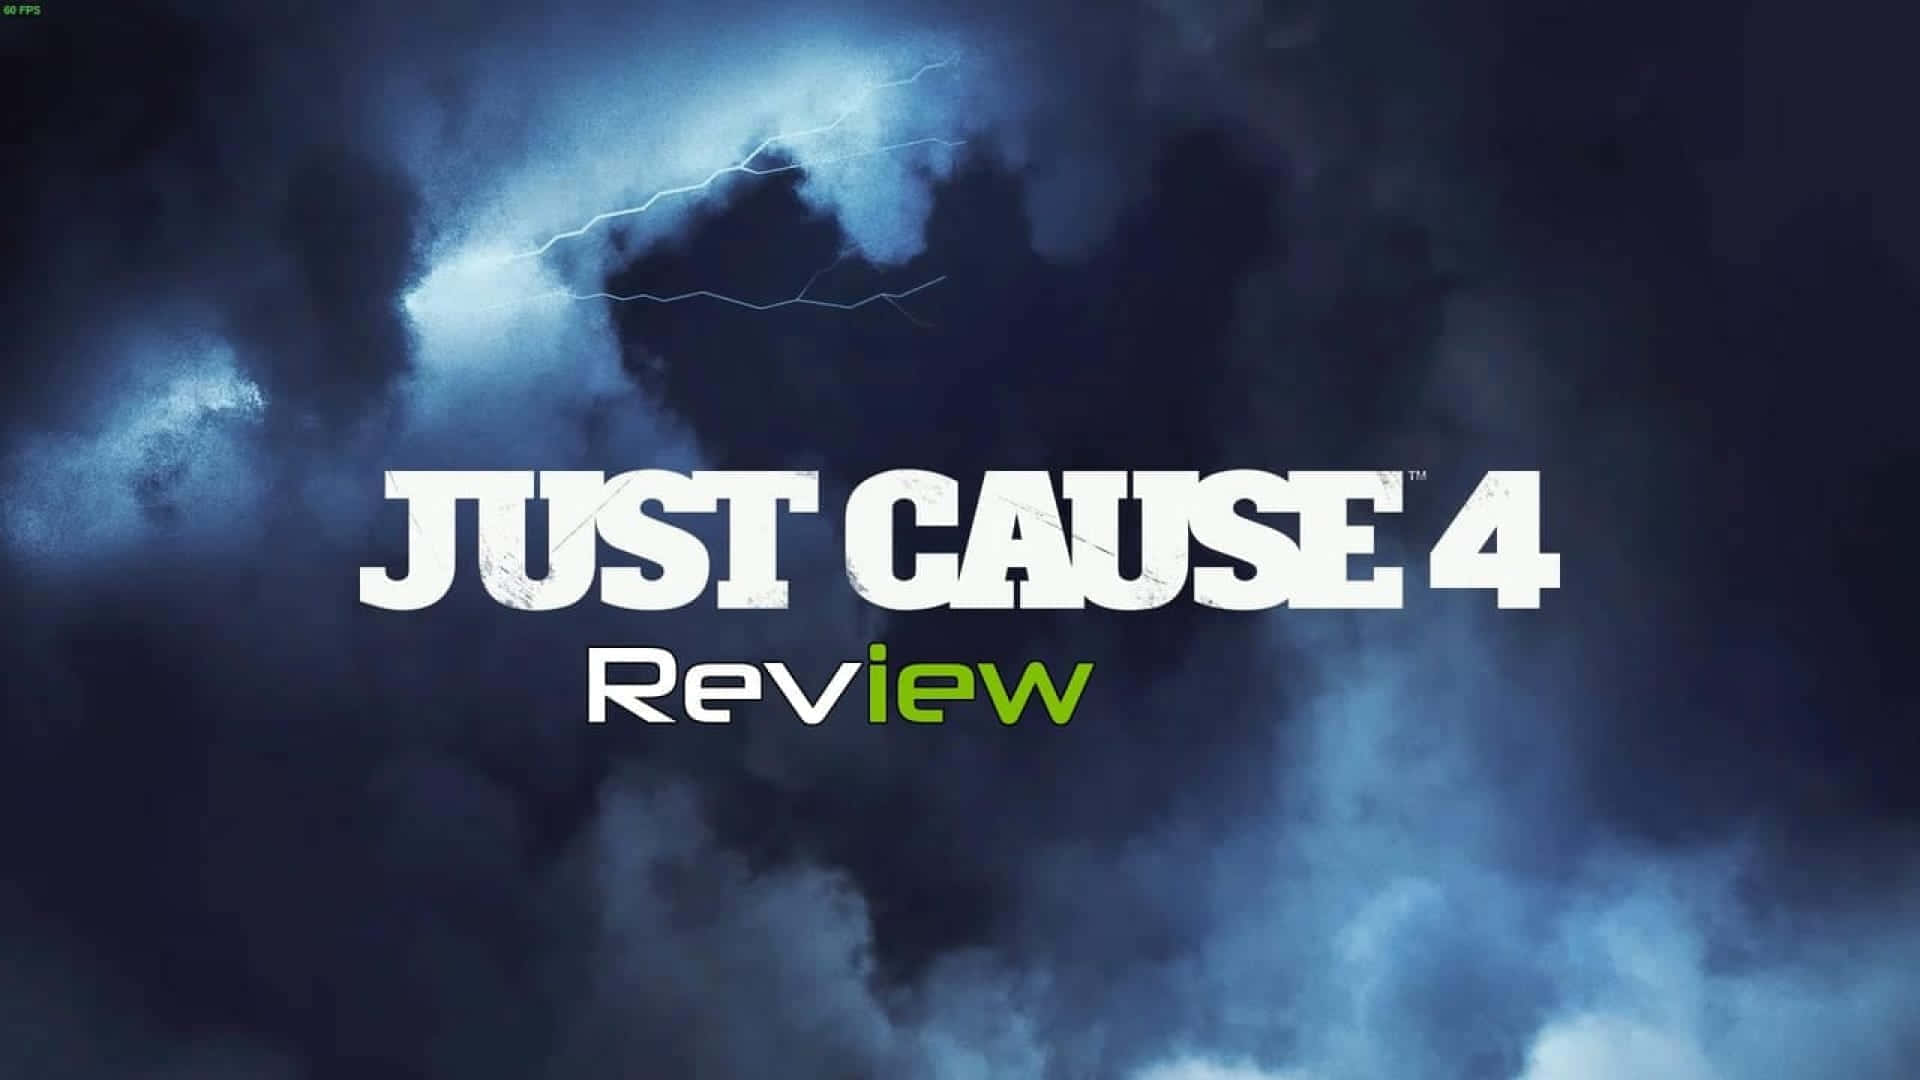 1920x1080 Just Cause 4 Background Review